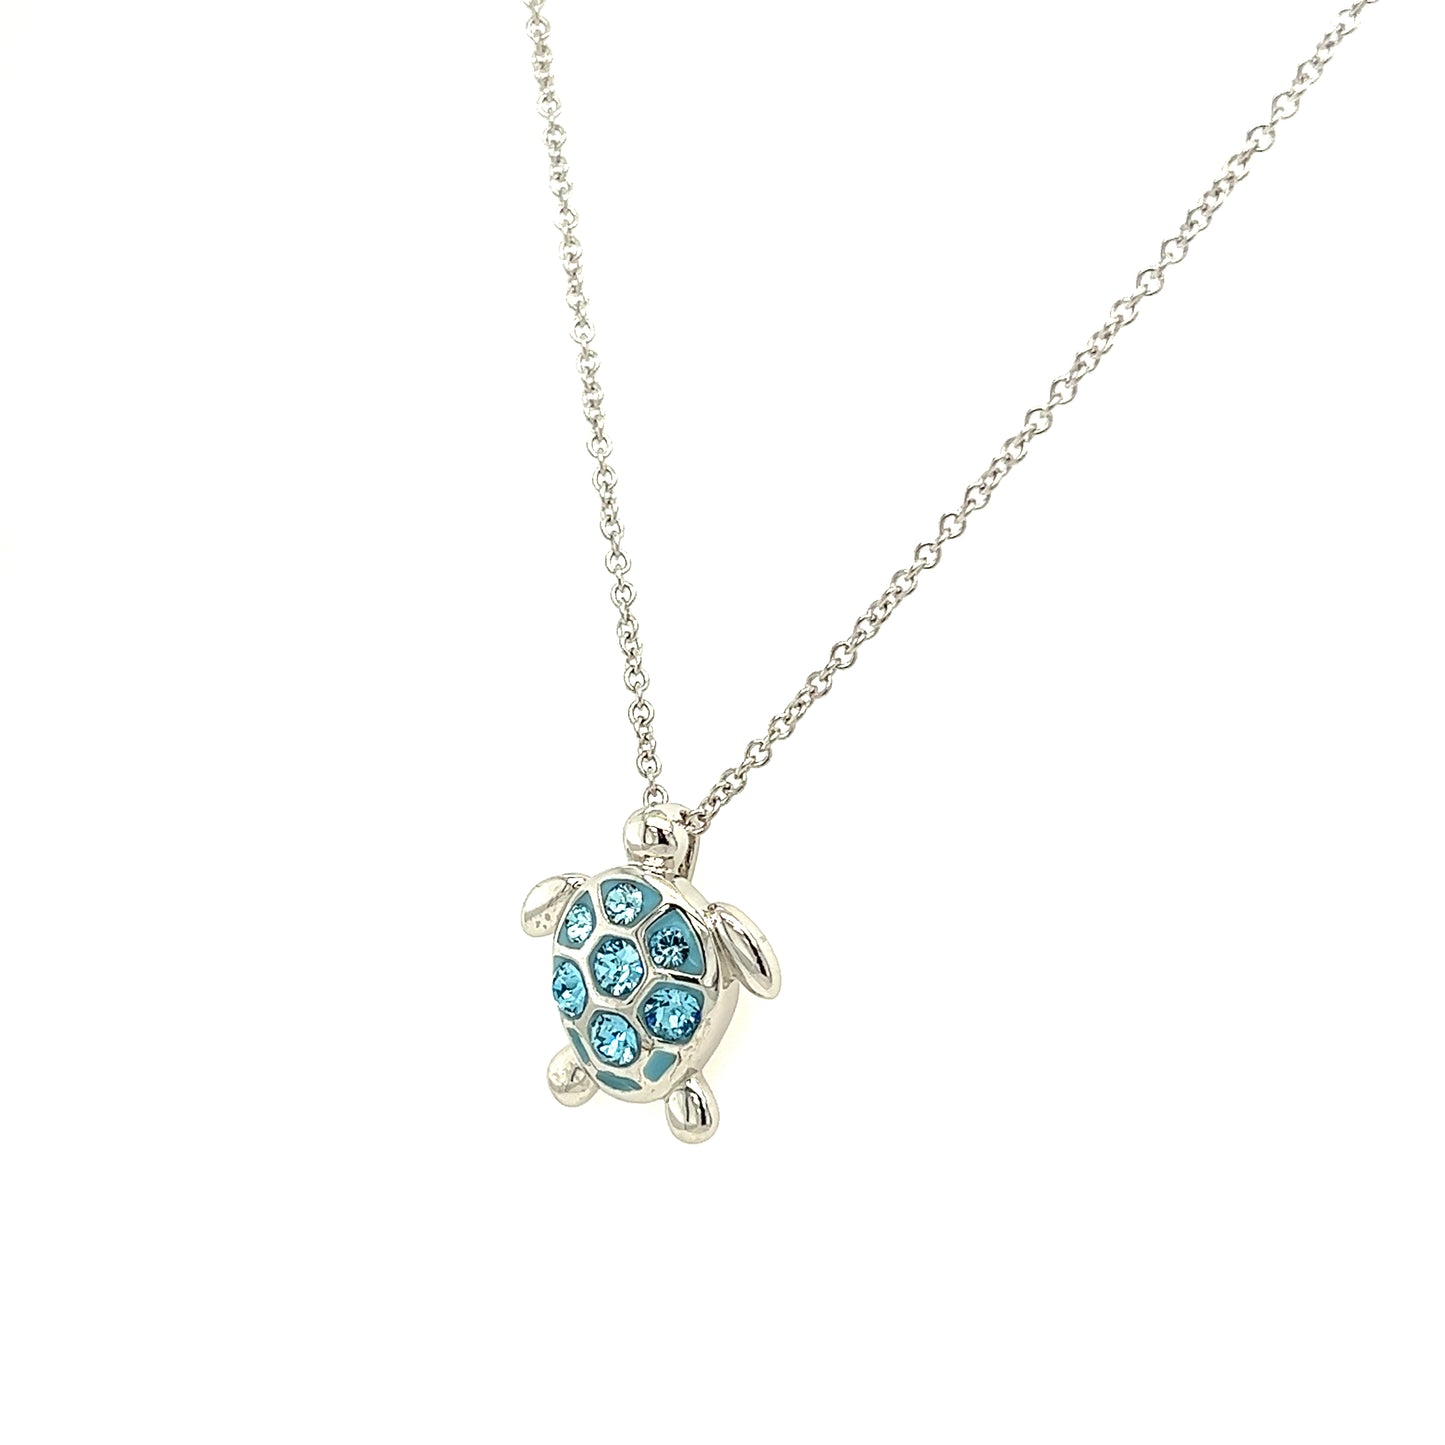 Aqua Sea Turtle Necklace with Aqua Crystals in Sterling Silver Right Side View